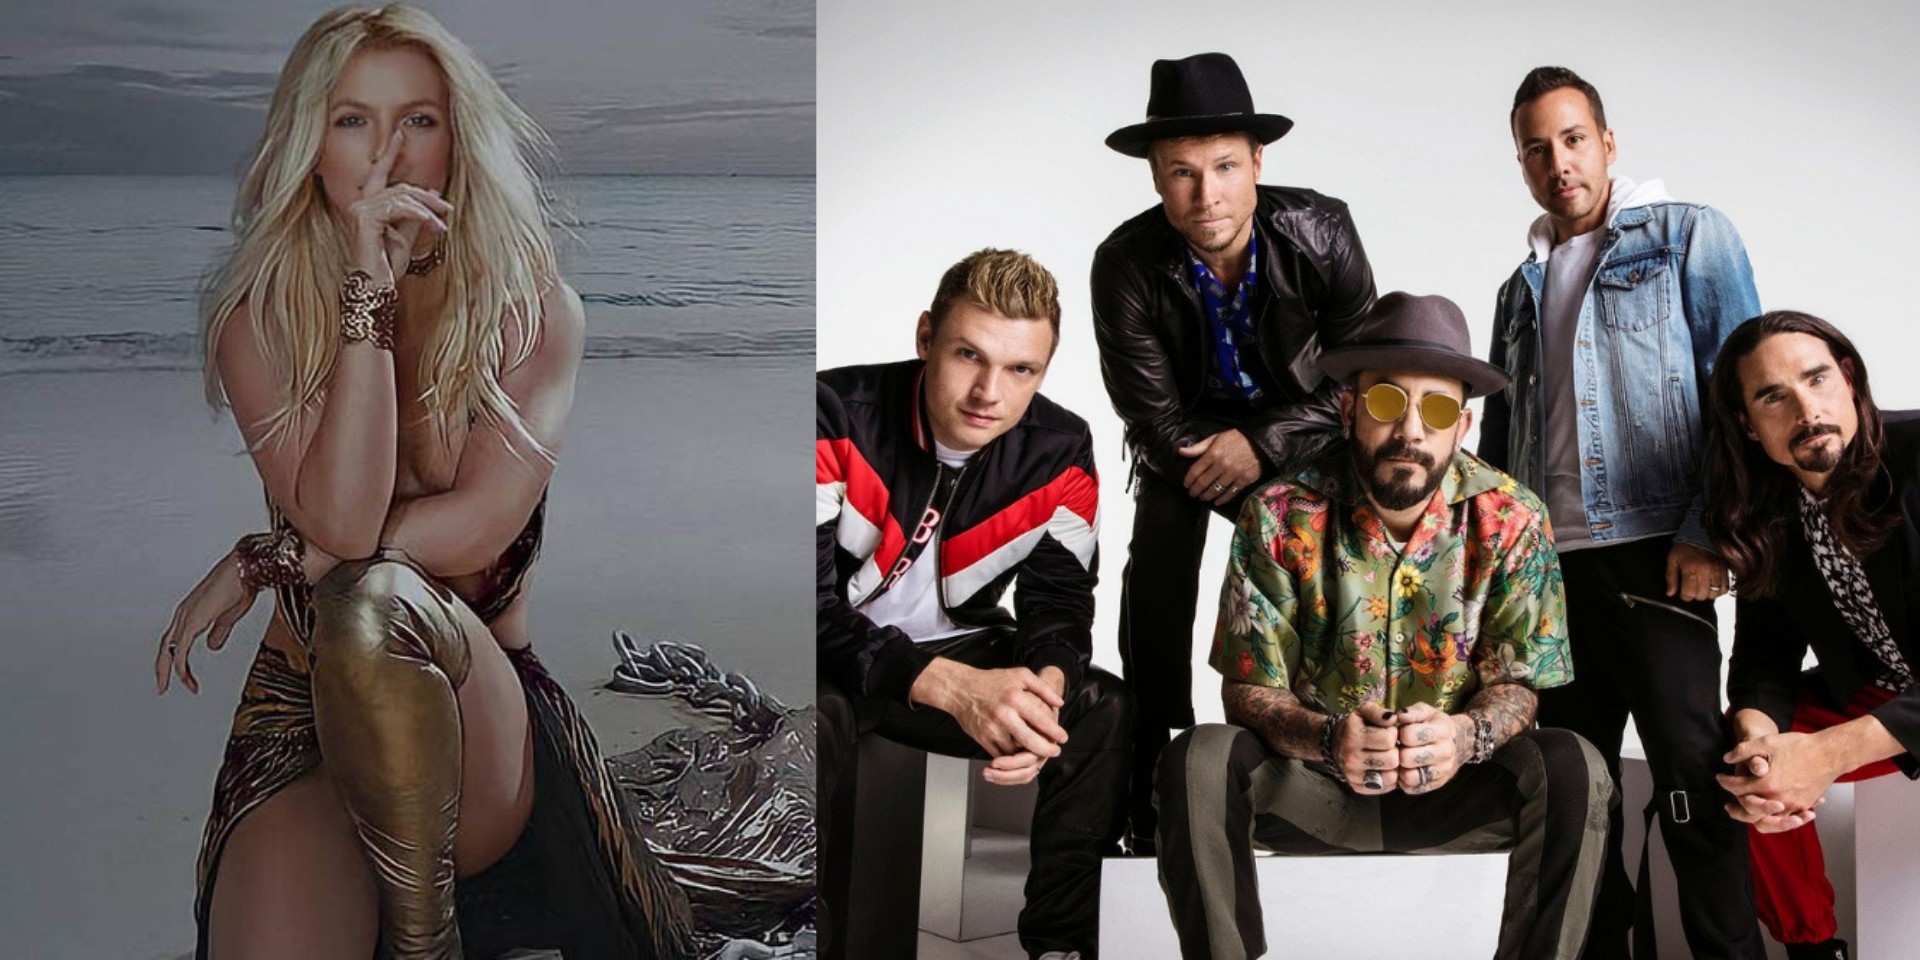 Britney Spears and the Backstreet Boys join forces on new collab track 'Matches' - listen